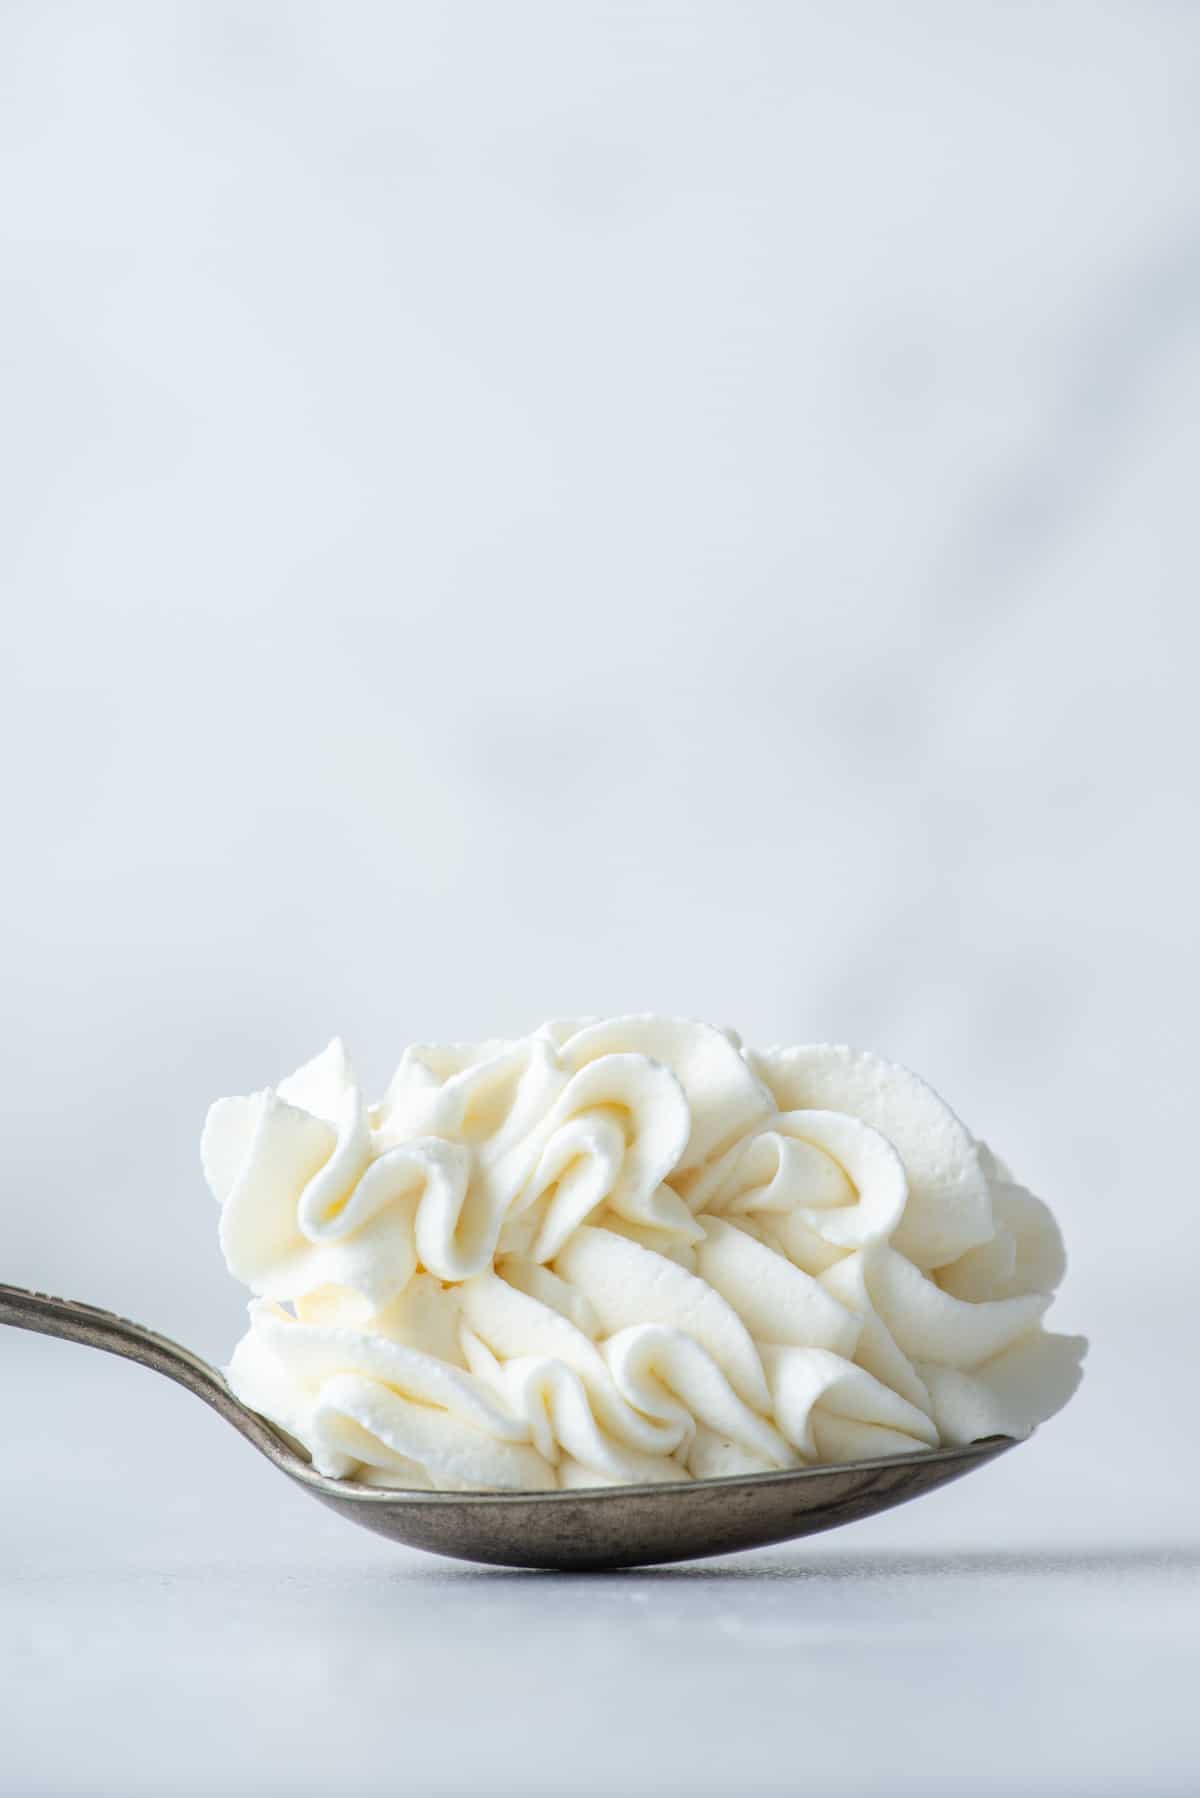 a spoon full of stabilized whipped cream laying on a flat surface